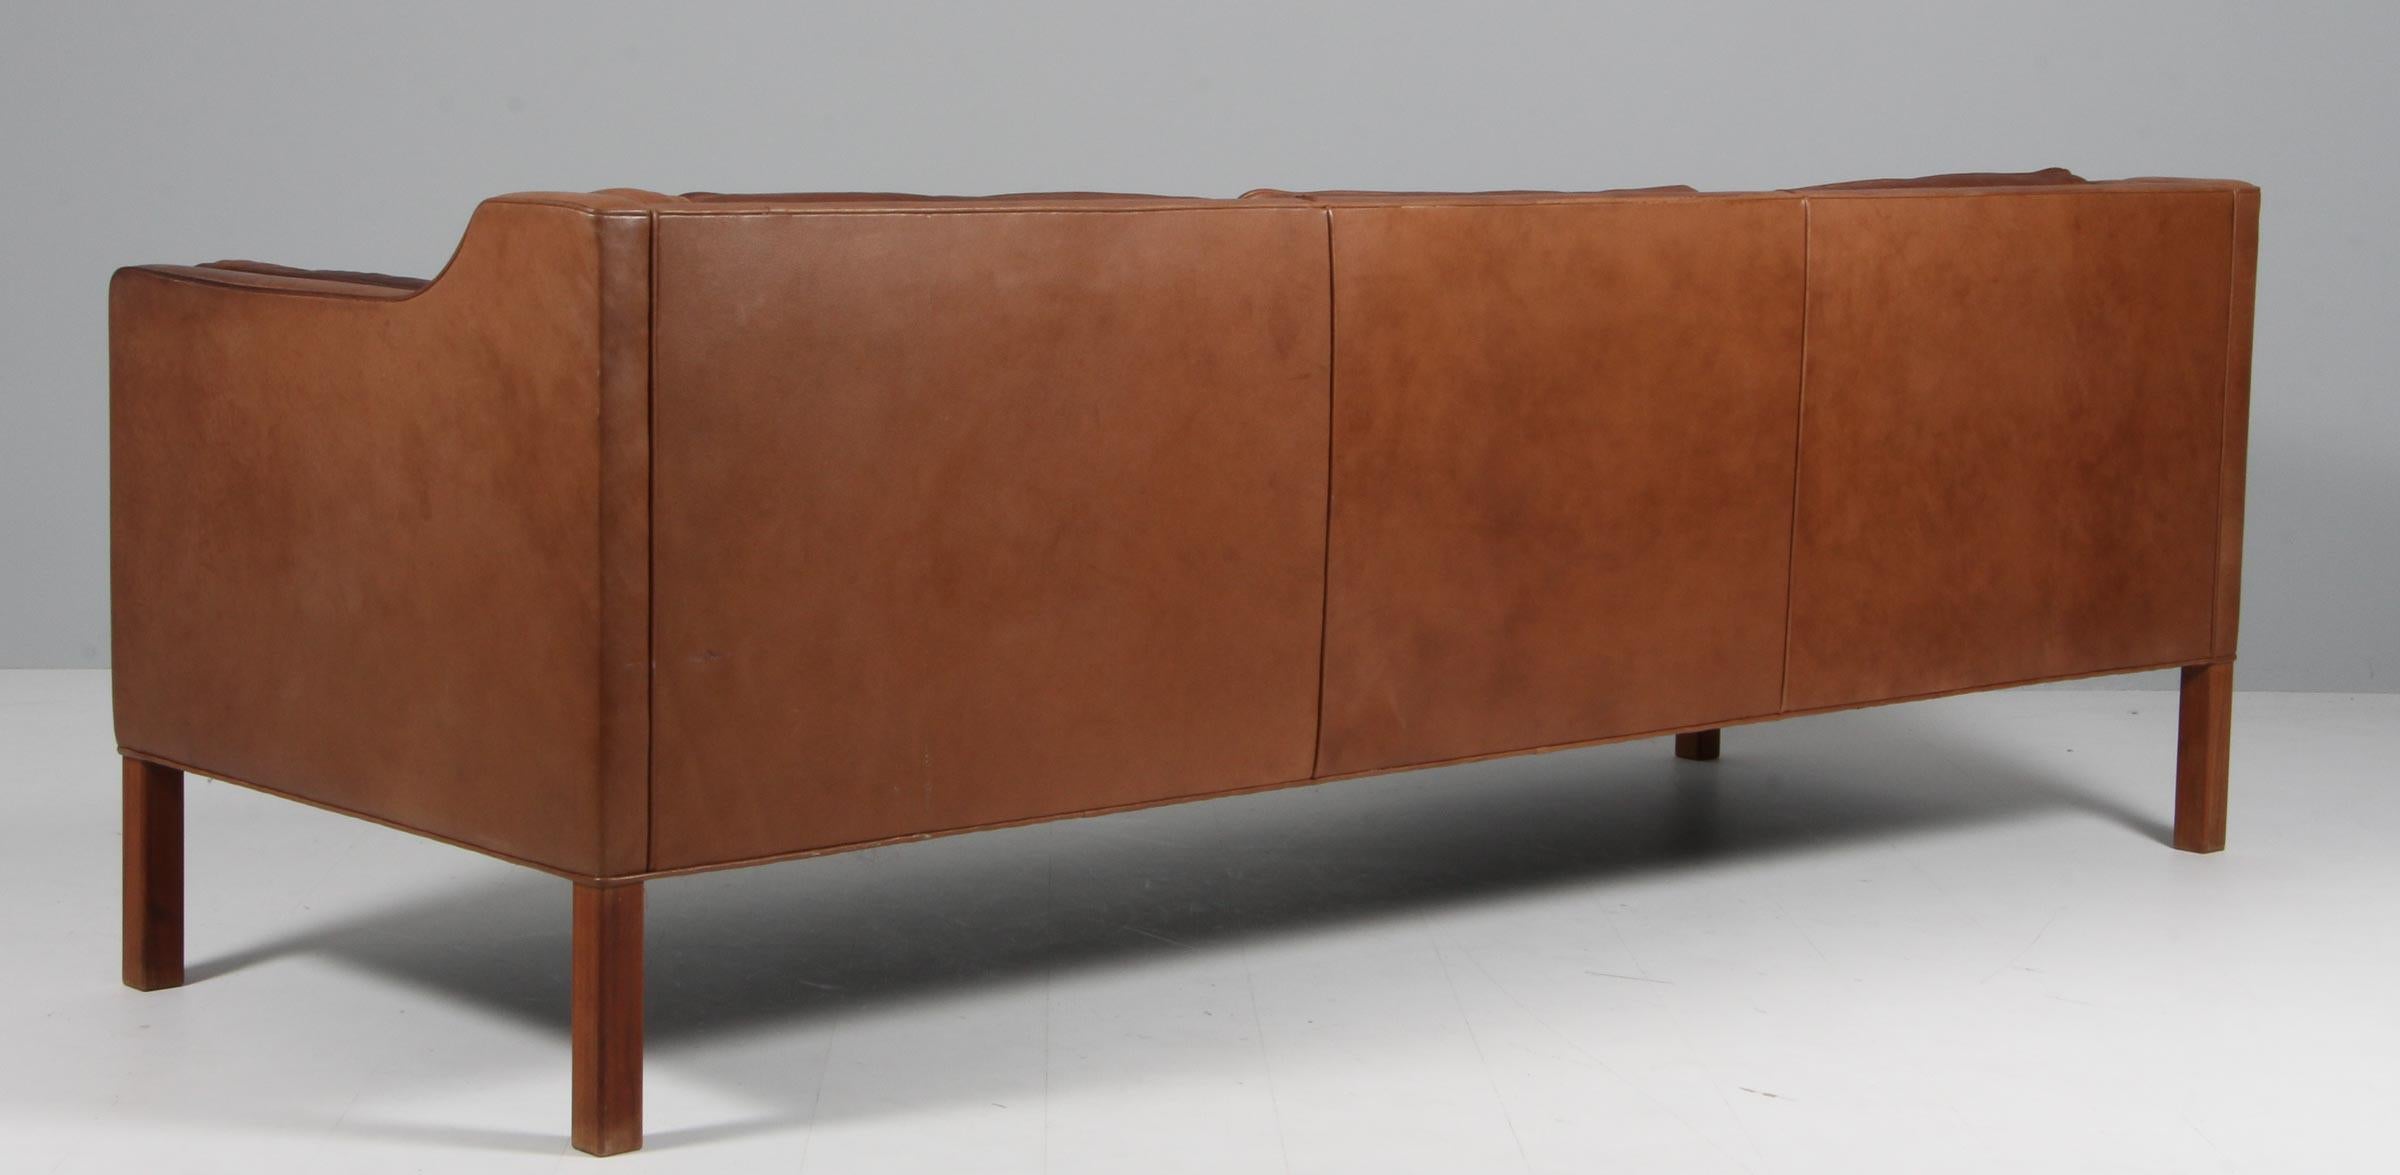 Børge Mogensen three-seat sofa with original patinated brown leather upholstery.

Legs of mahogany.

Model 2213, made by Fredericia Furniture.